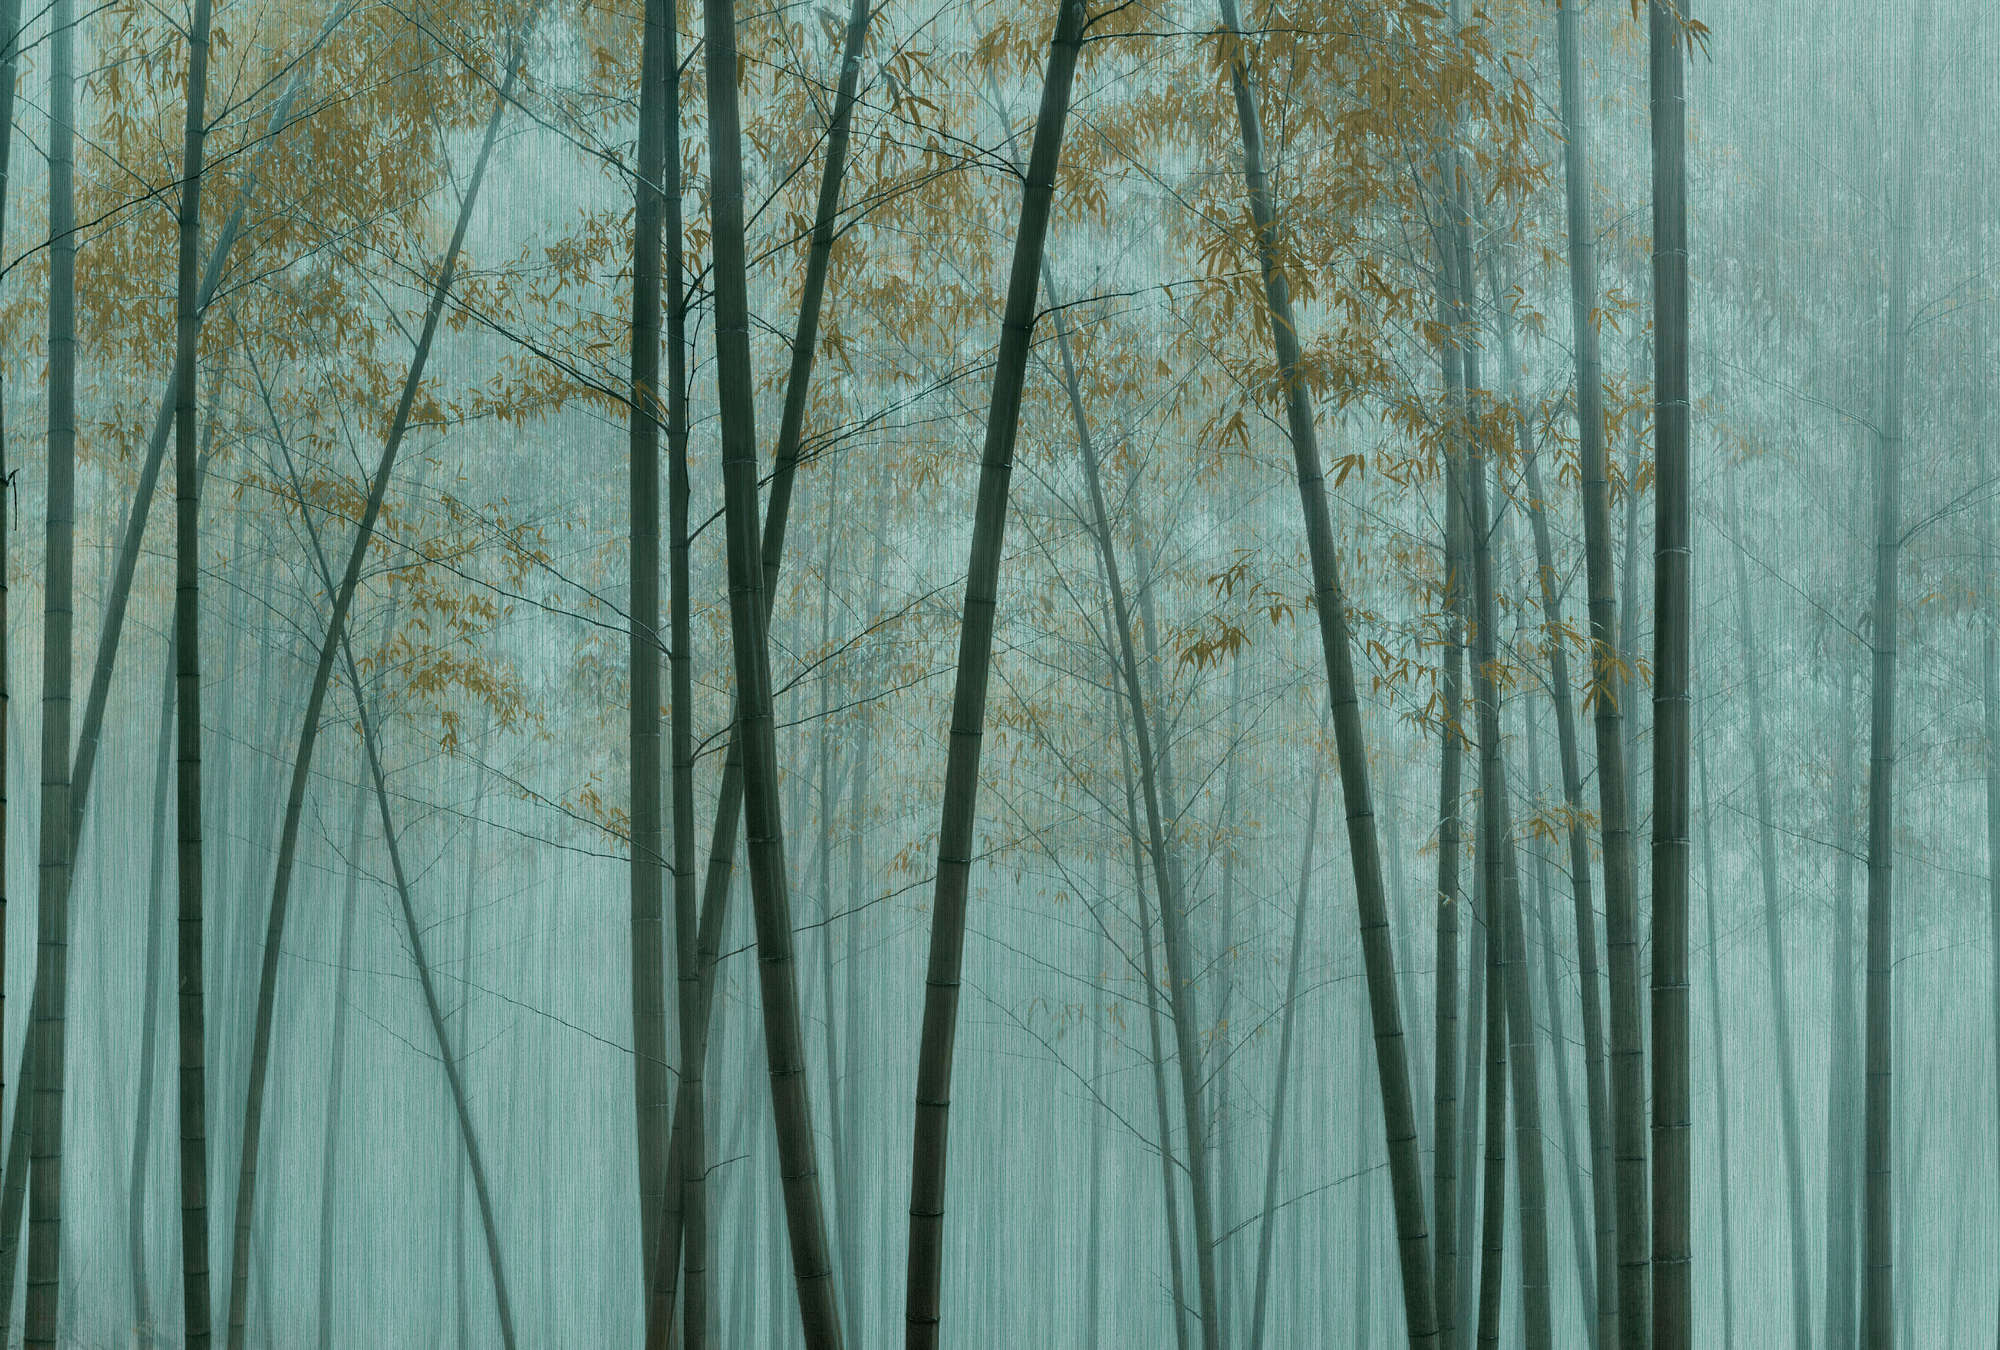             In the Bamboo 3 - Asia photo wallpaper bamboo forest
        